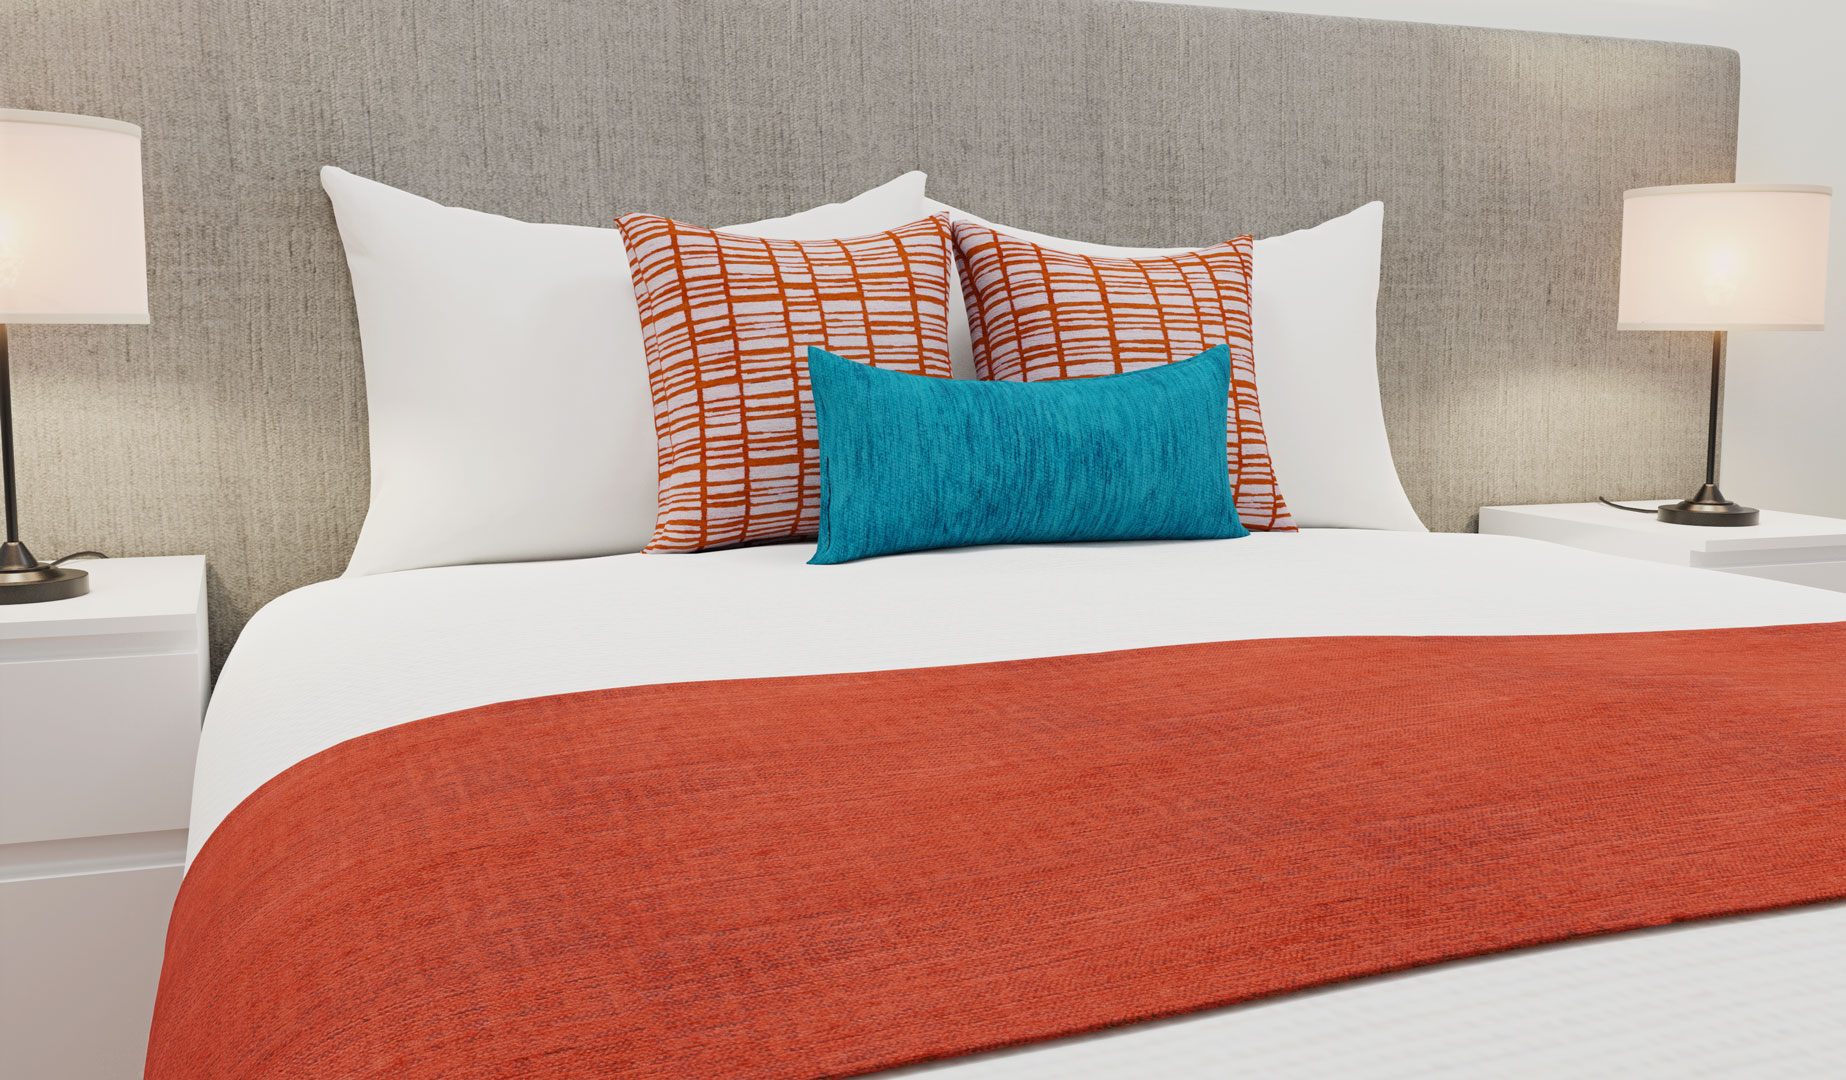 Clipper Coral Luxury Runner with Persia Turquoise Breakfast Cushion and Vue Concept Coral Large Decorative Cushions